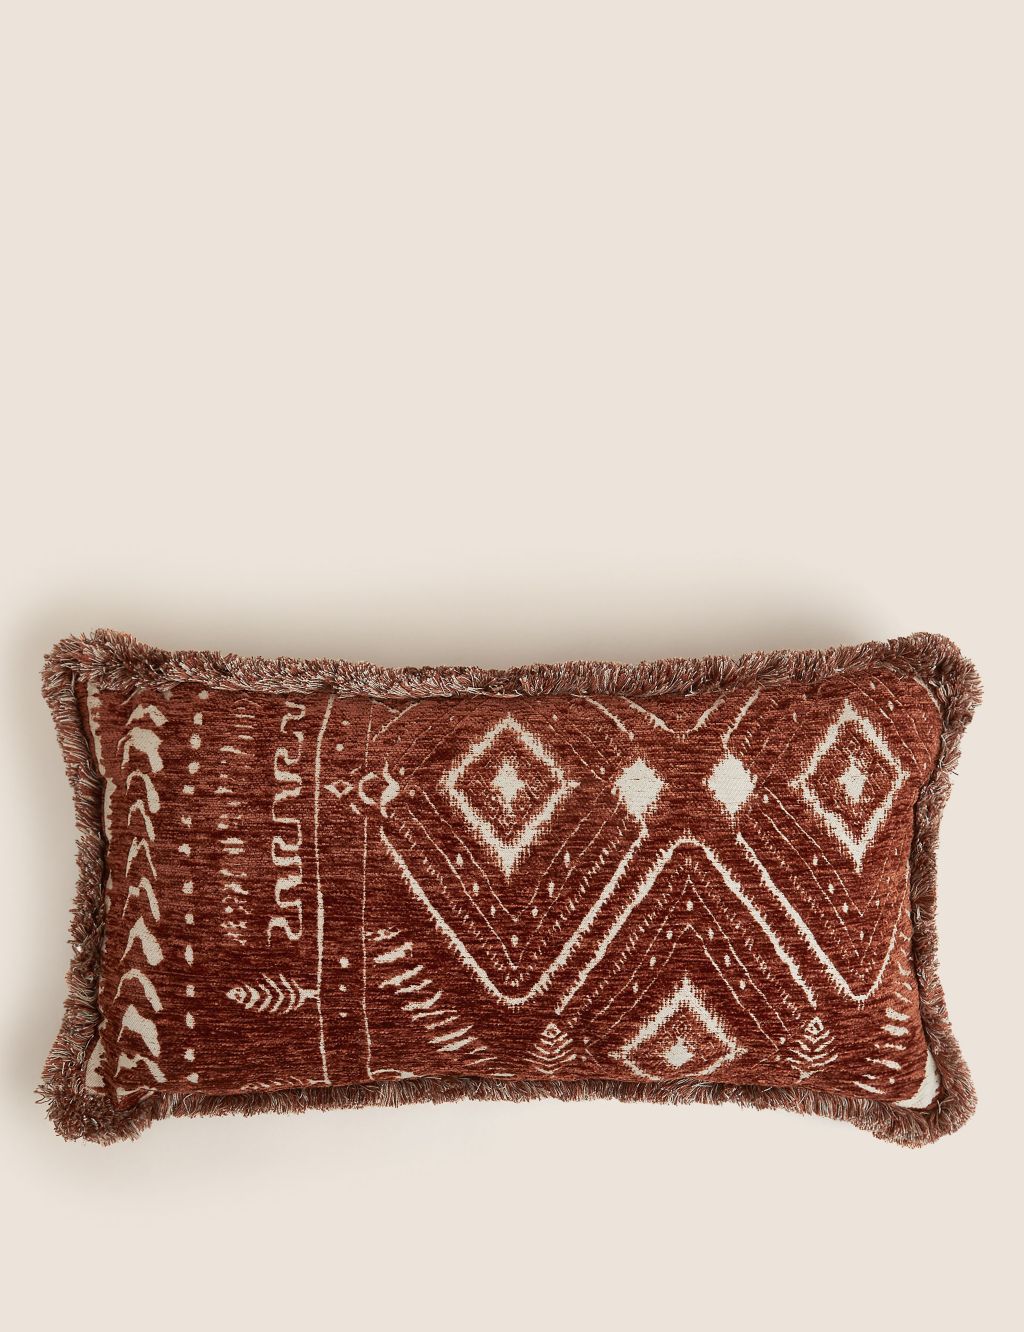 Chenille Patterned Bolster Cushion image 1